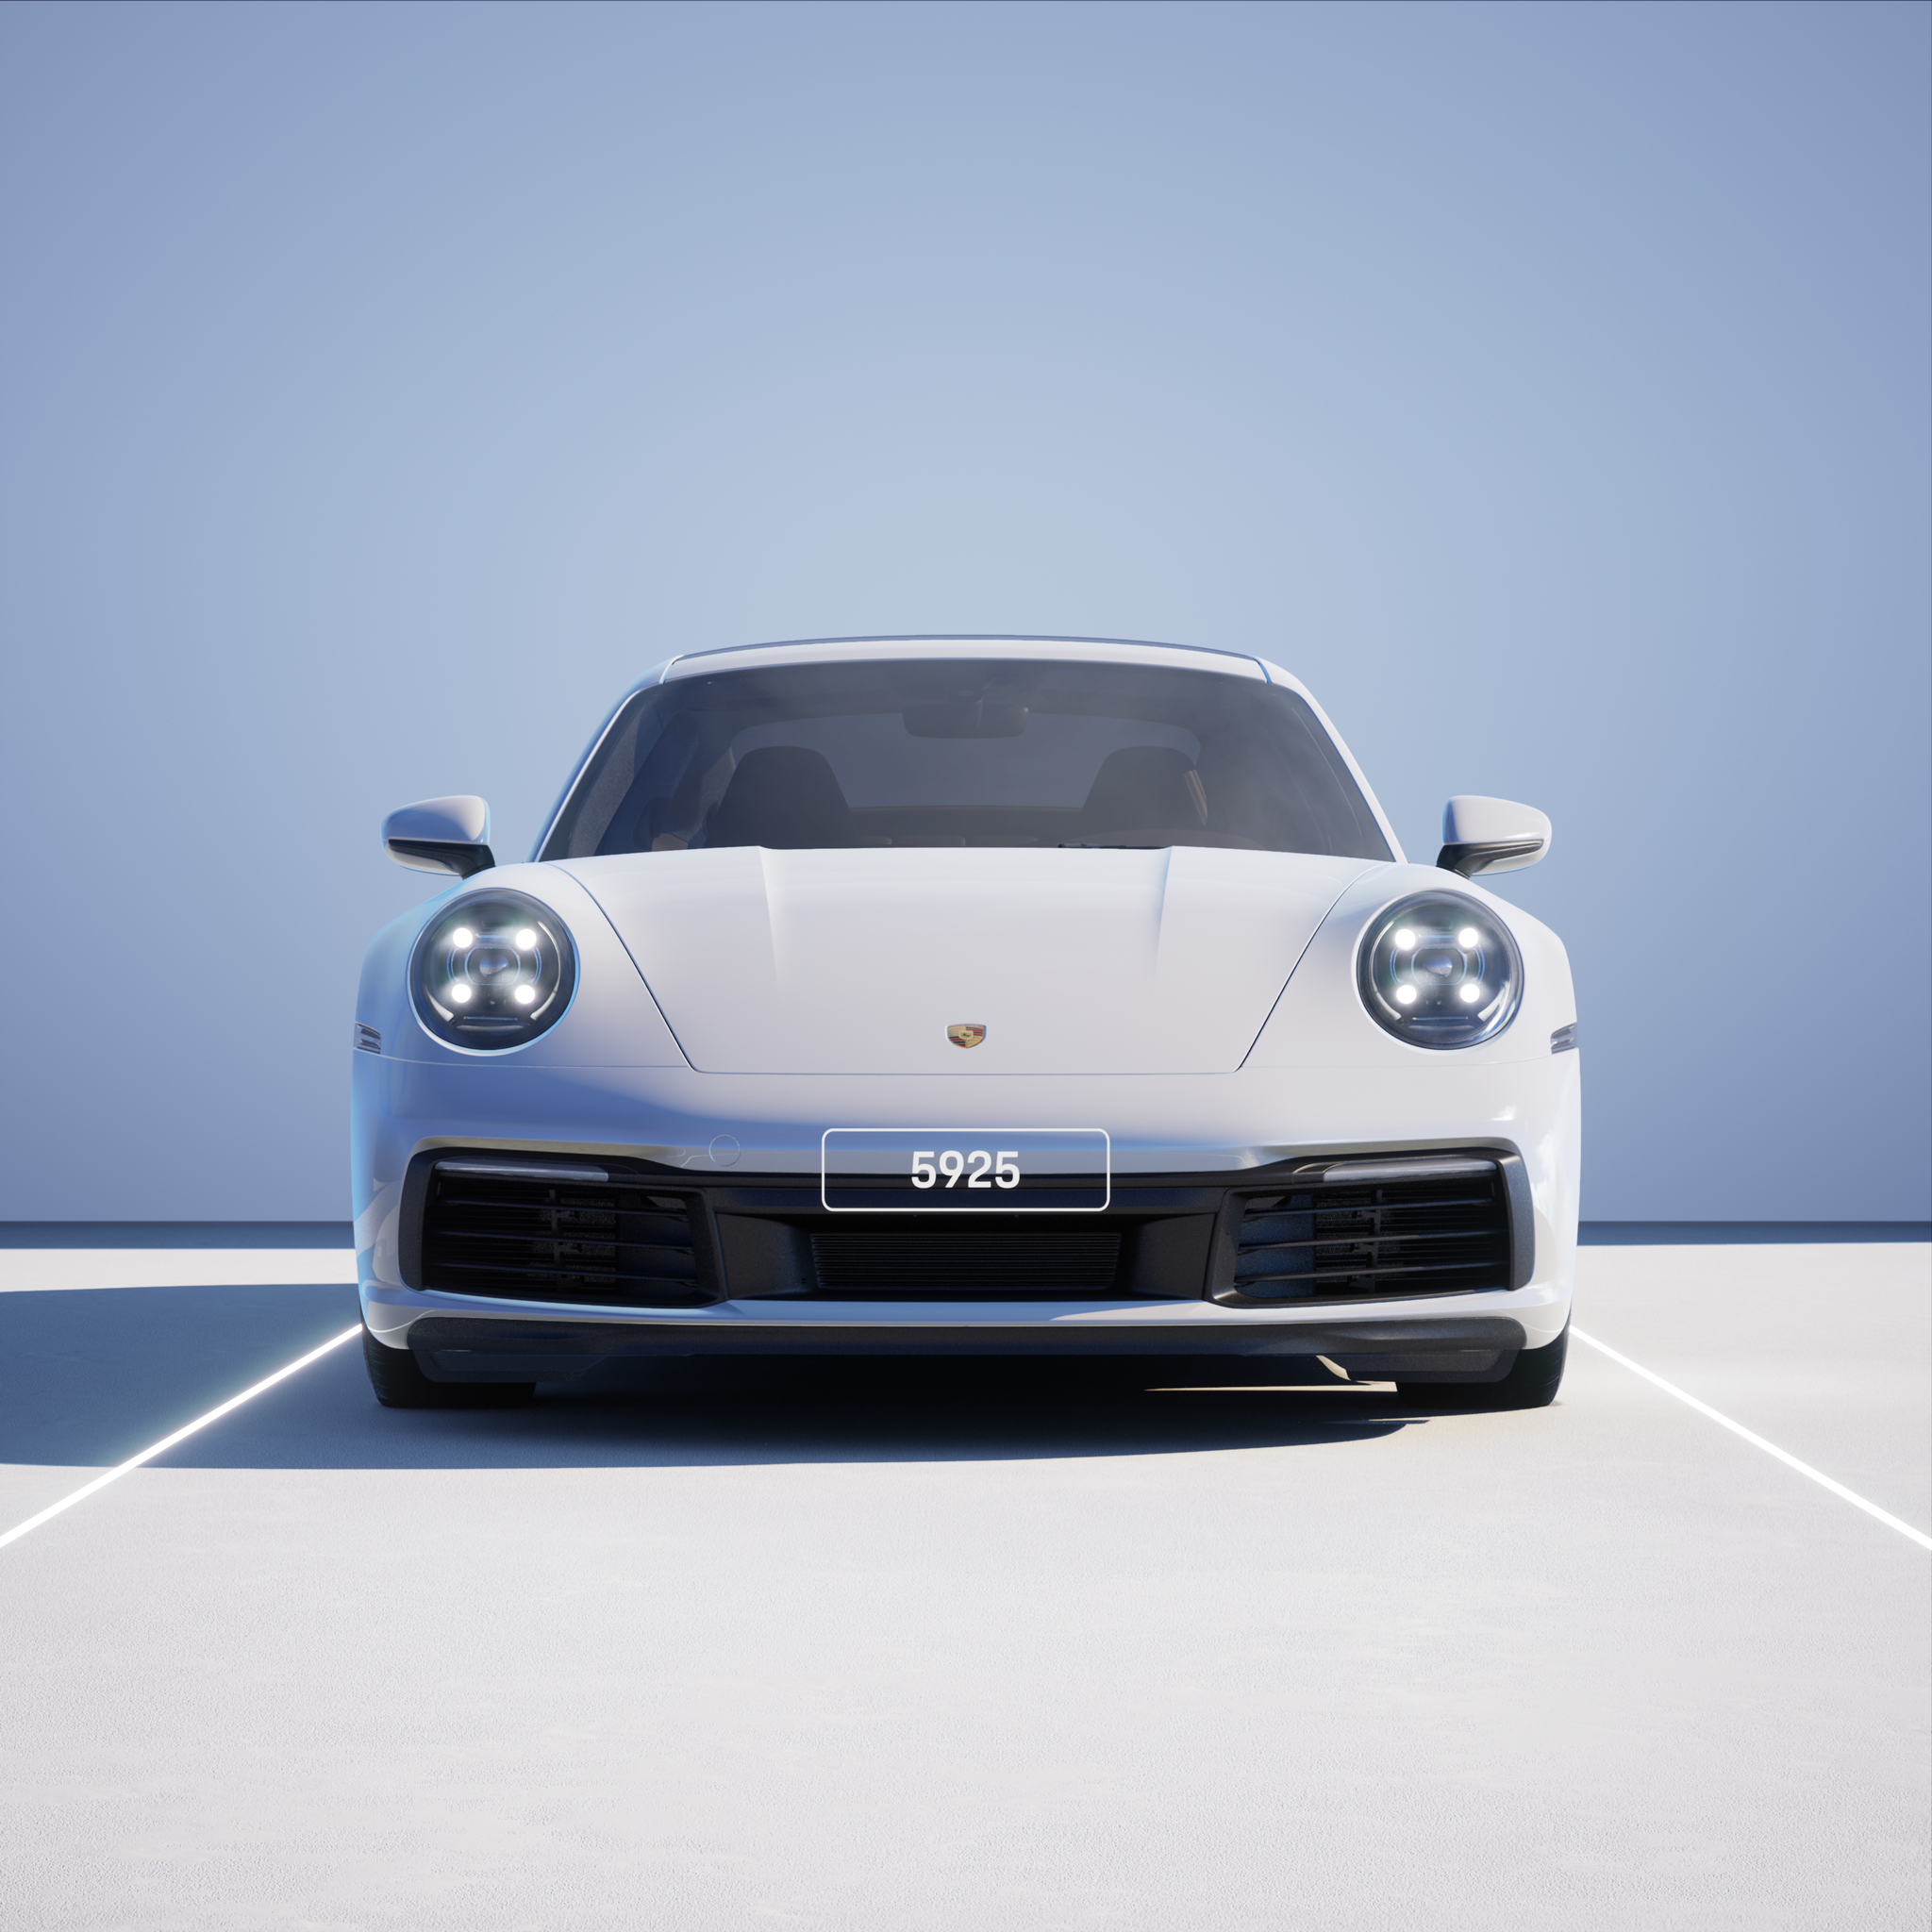 The PORSCHΞ 911 5925 image in phase